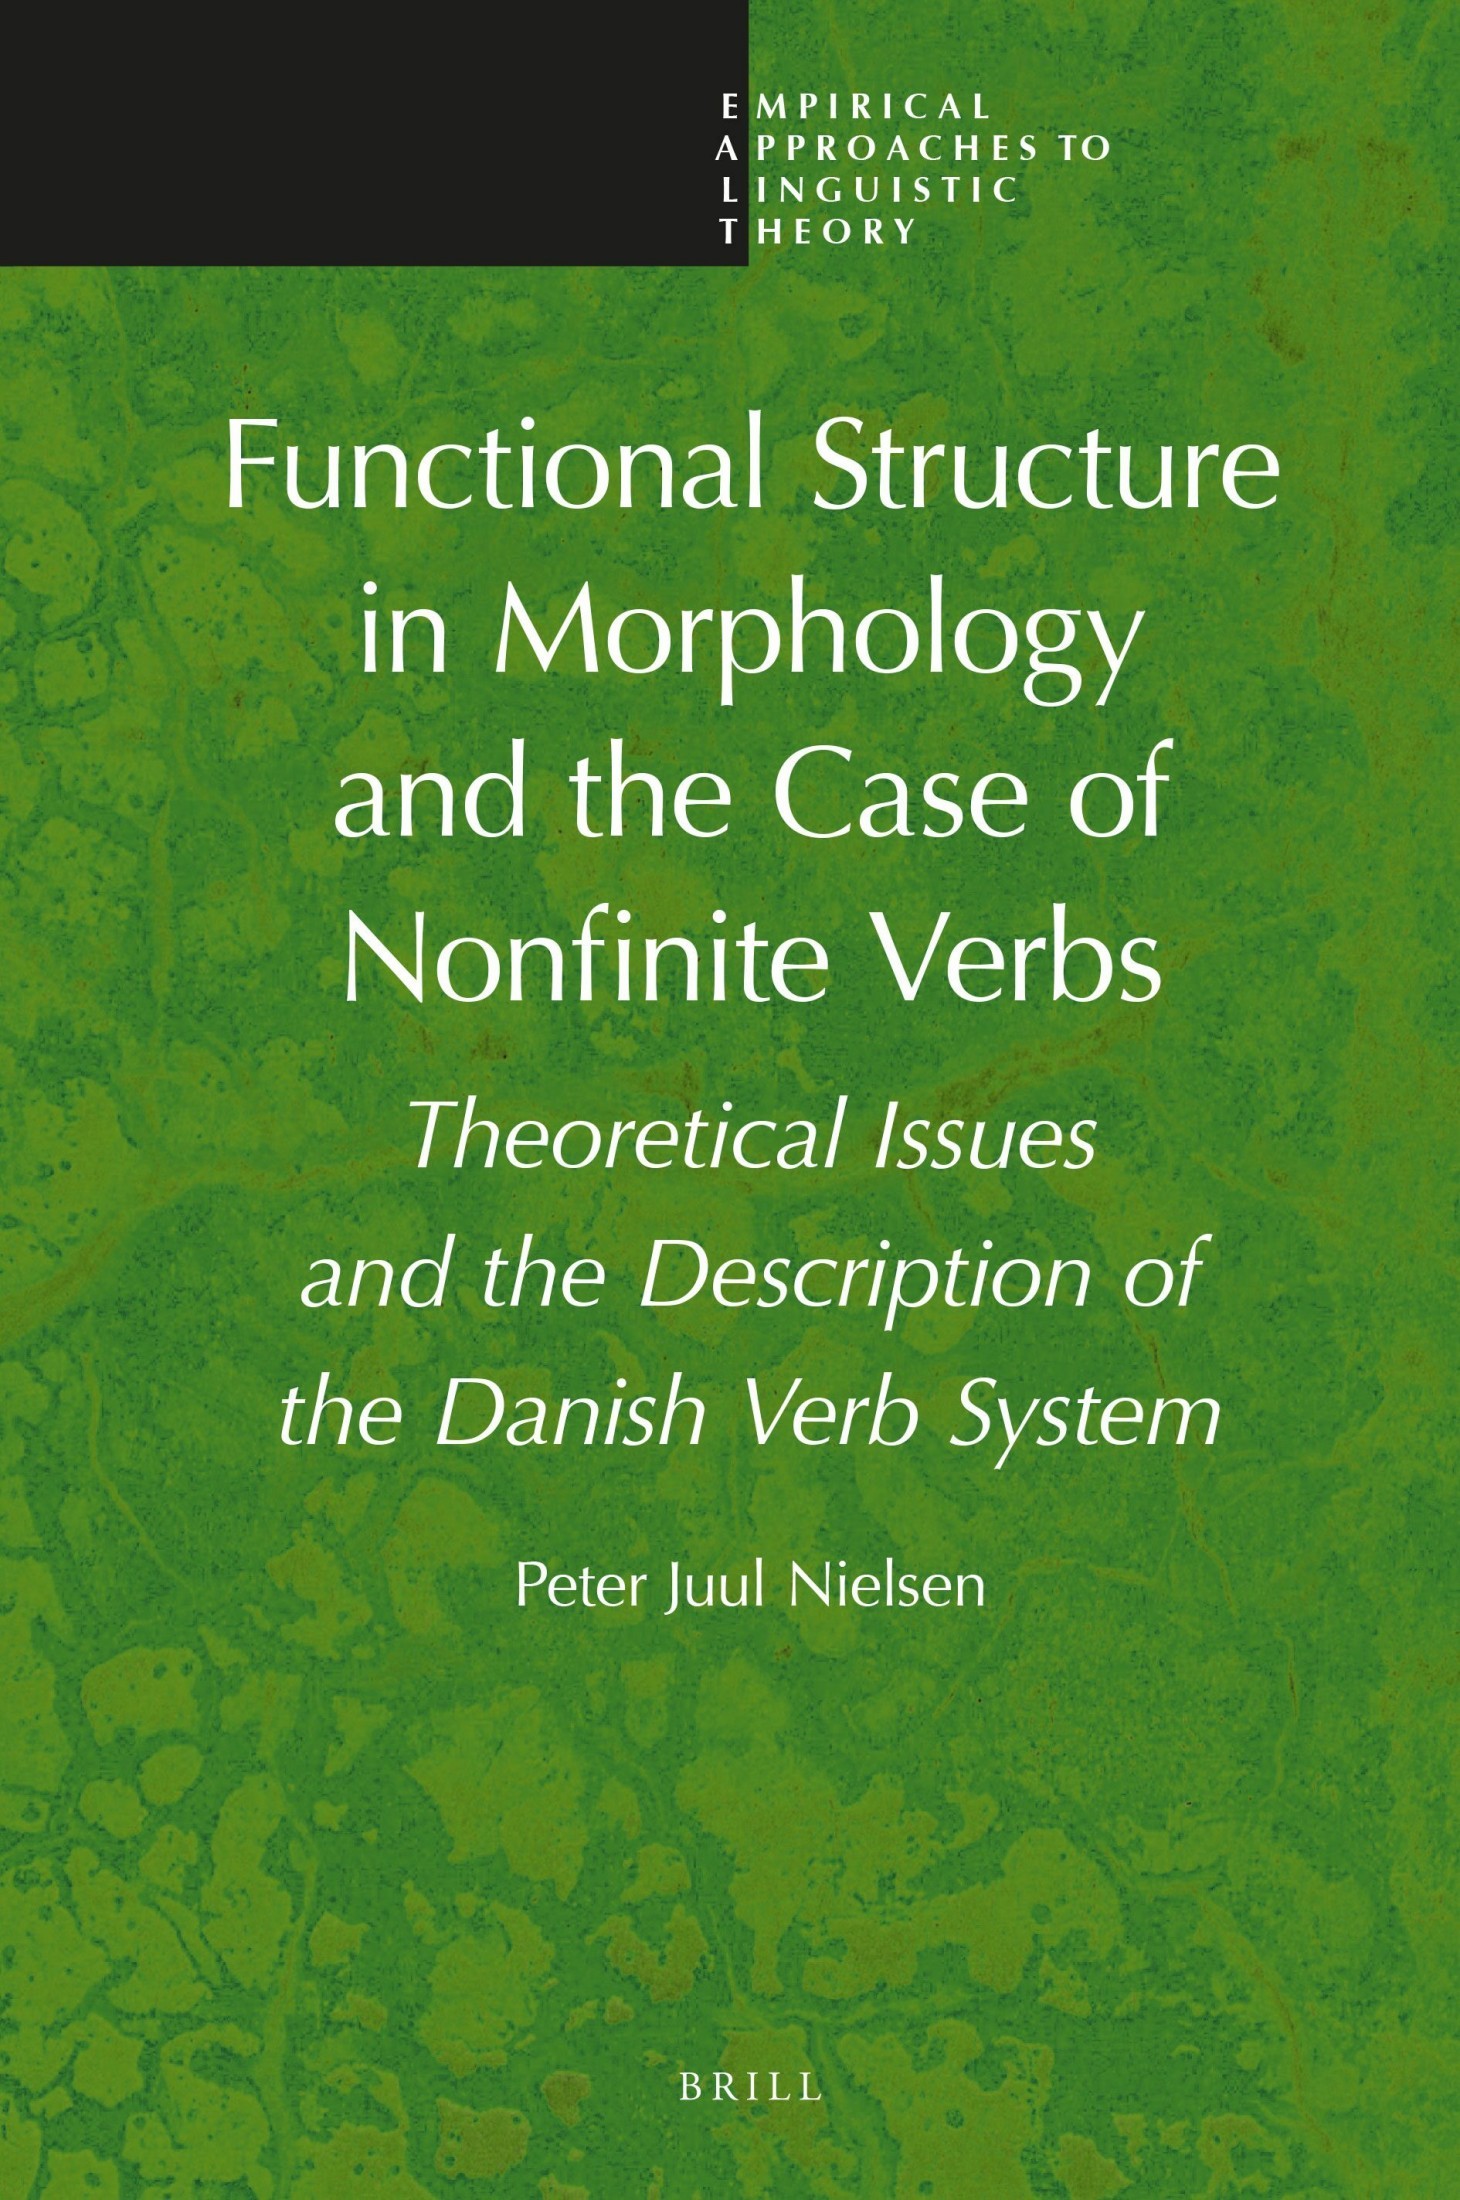 Functional Structure in Morphology and the Case of Nonfinite Verbs: Theoretical Issues and the Description of the Danish Verb System